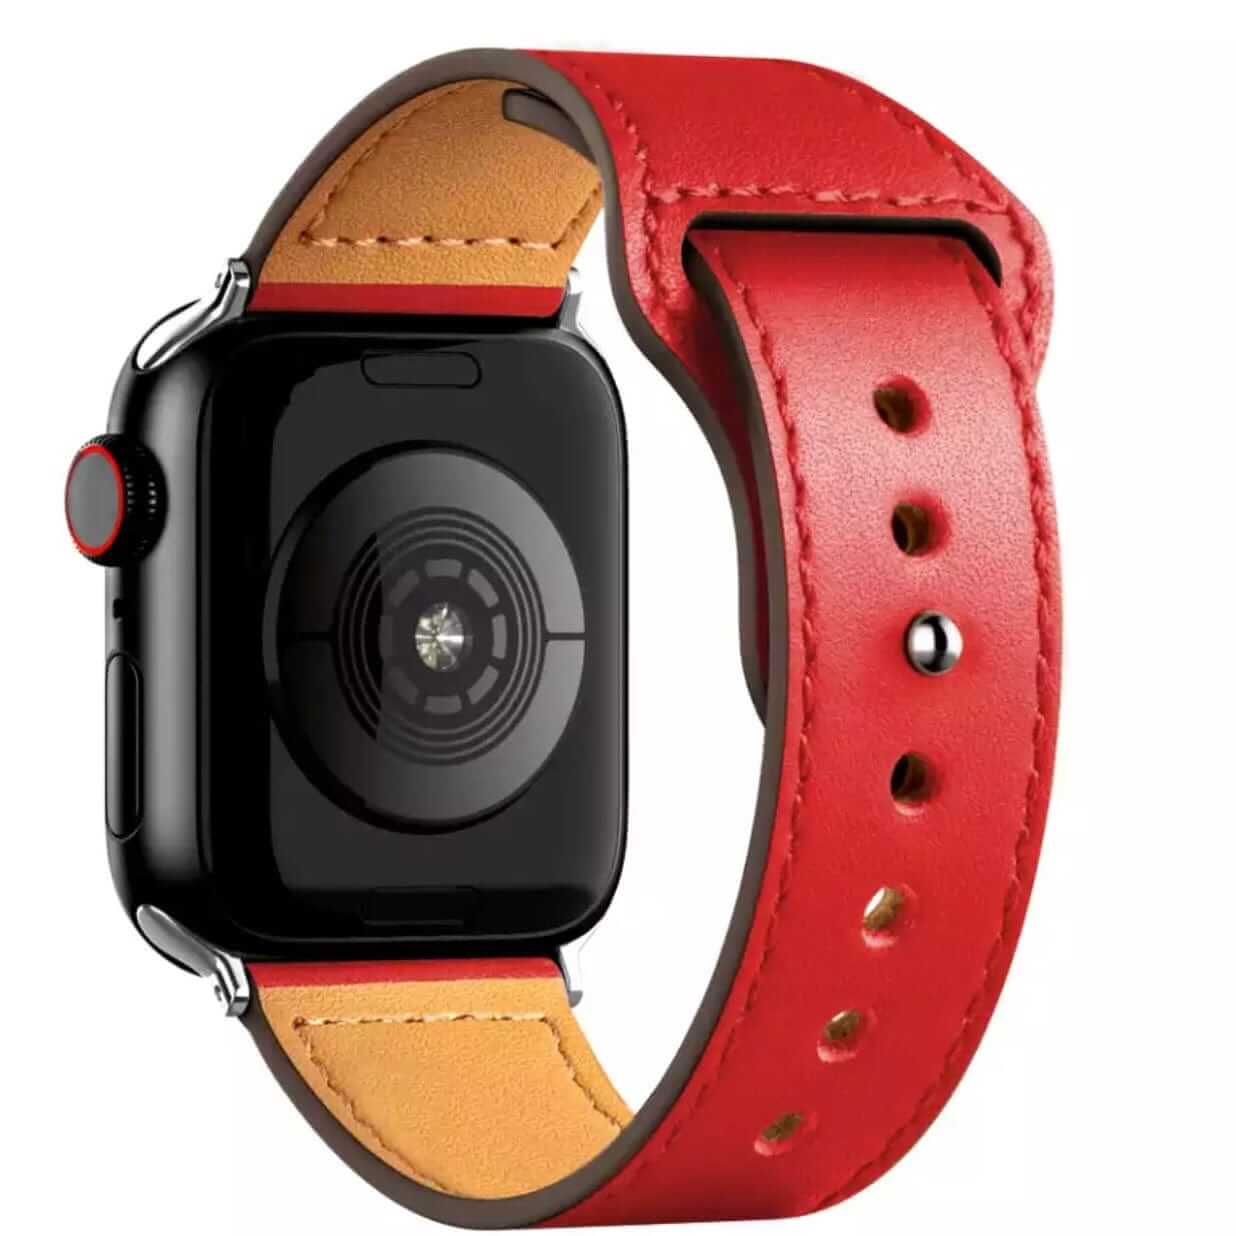 Apple Watch Genuine Leather Band - Infinity Loops